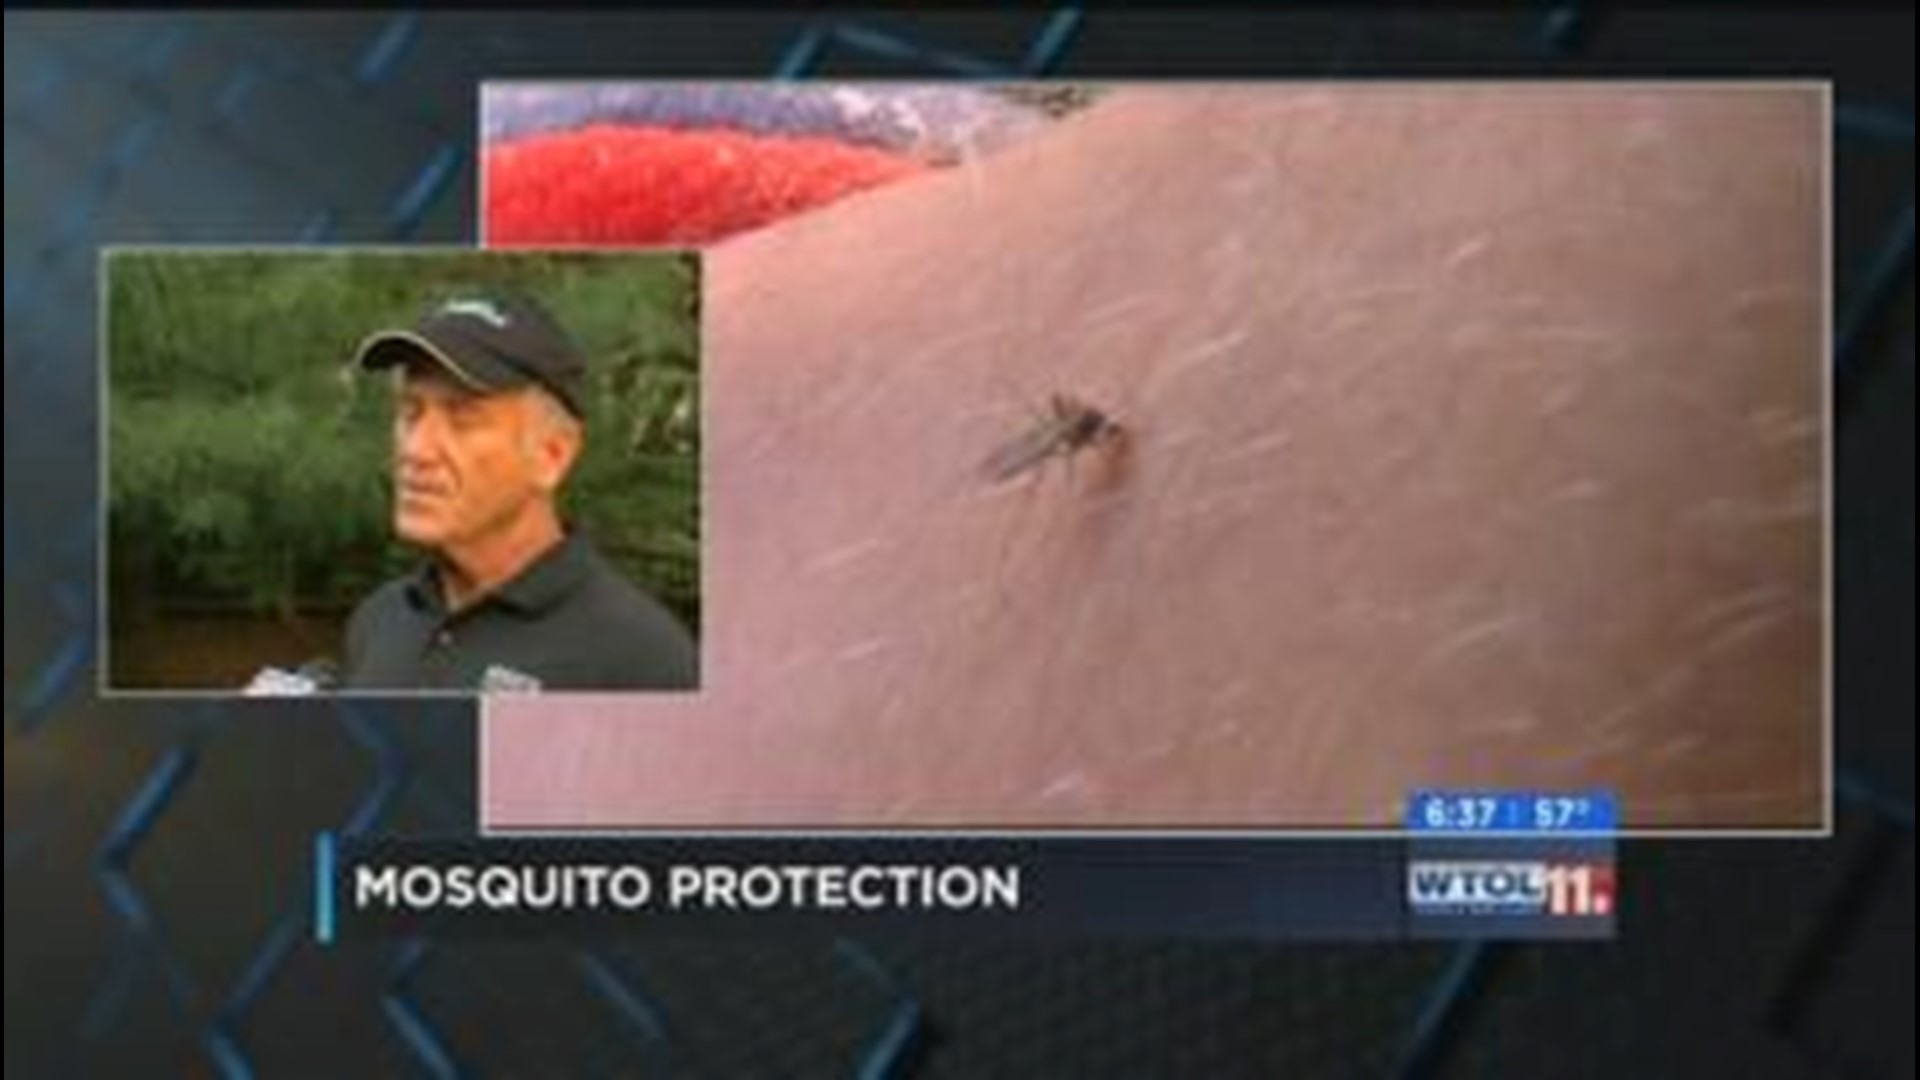 Know how to avoid those pesky bites during mosquito season